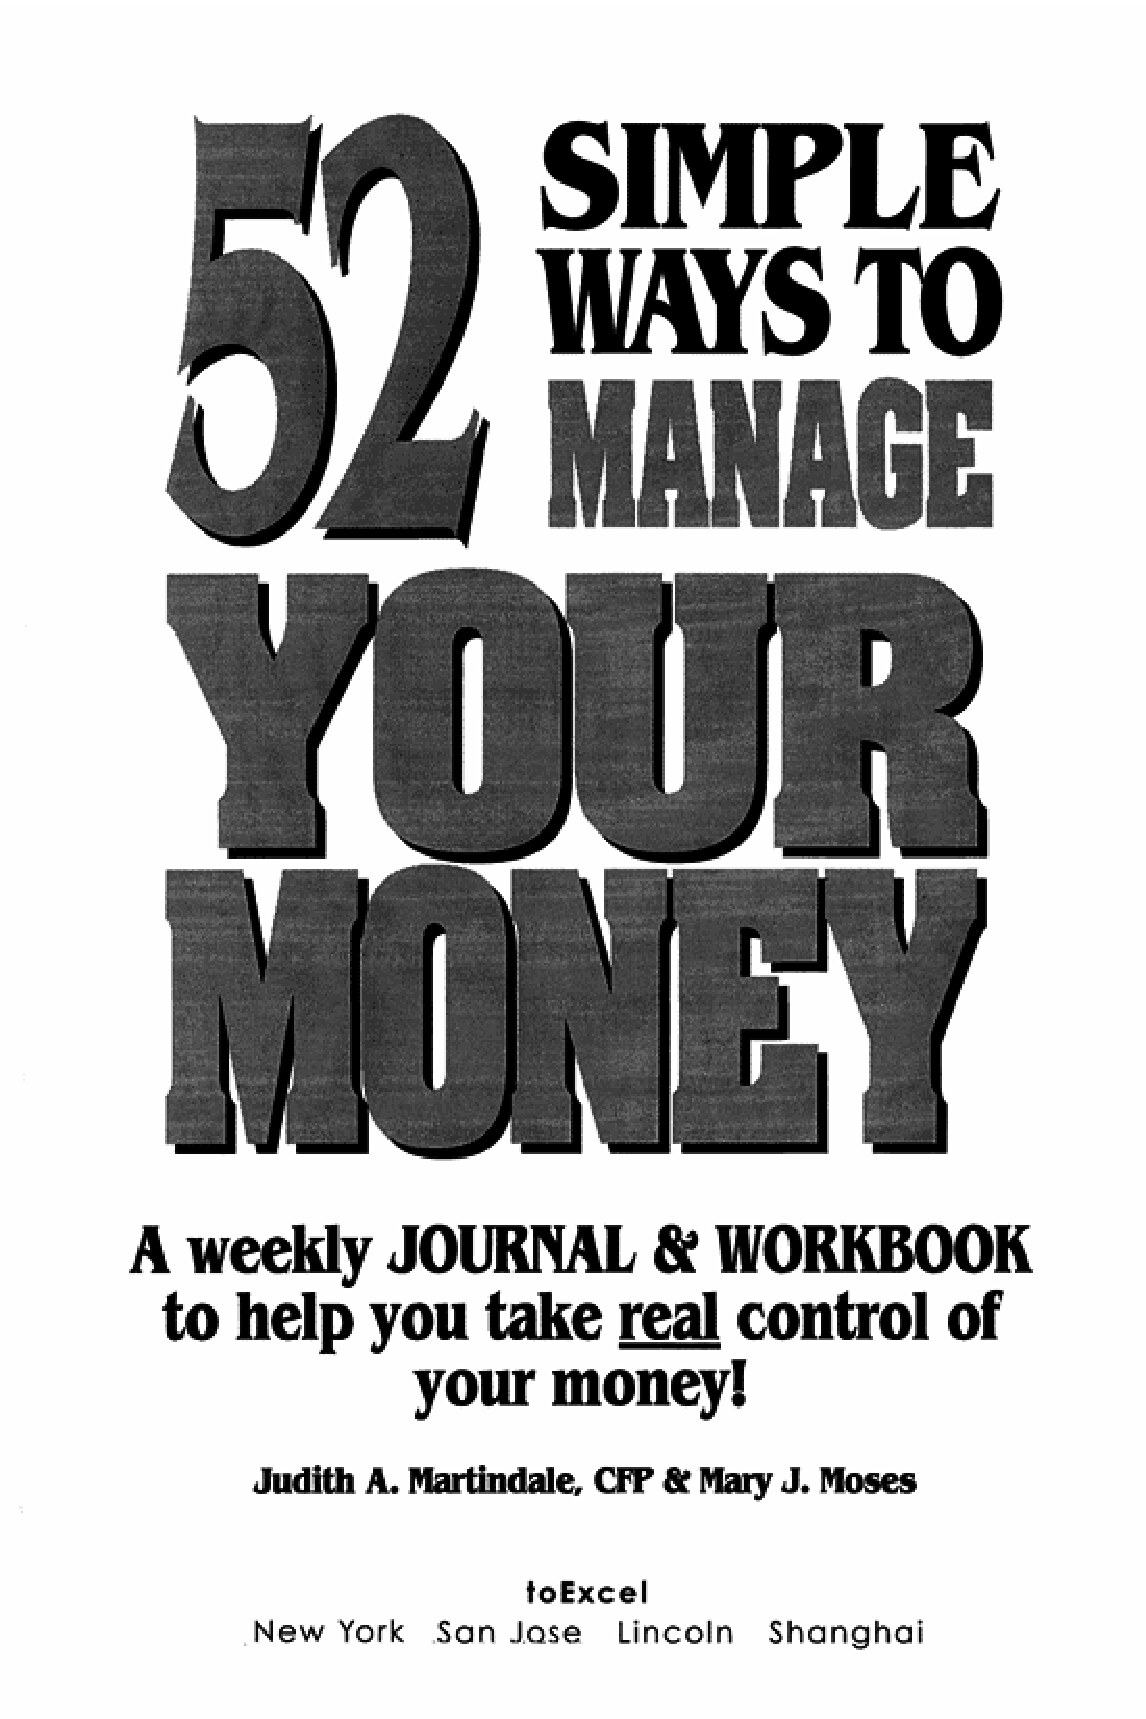 52 Simple Ways to Manage Your Money